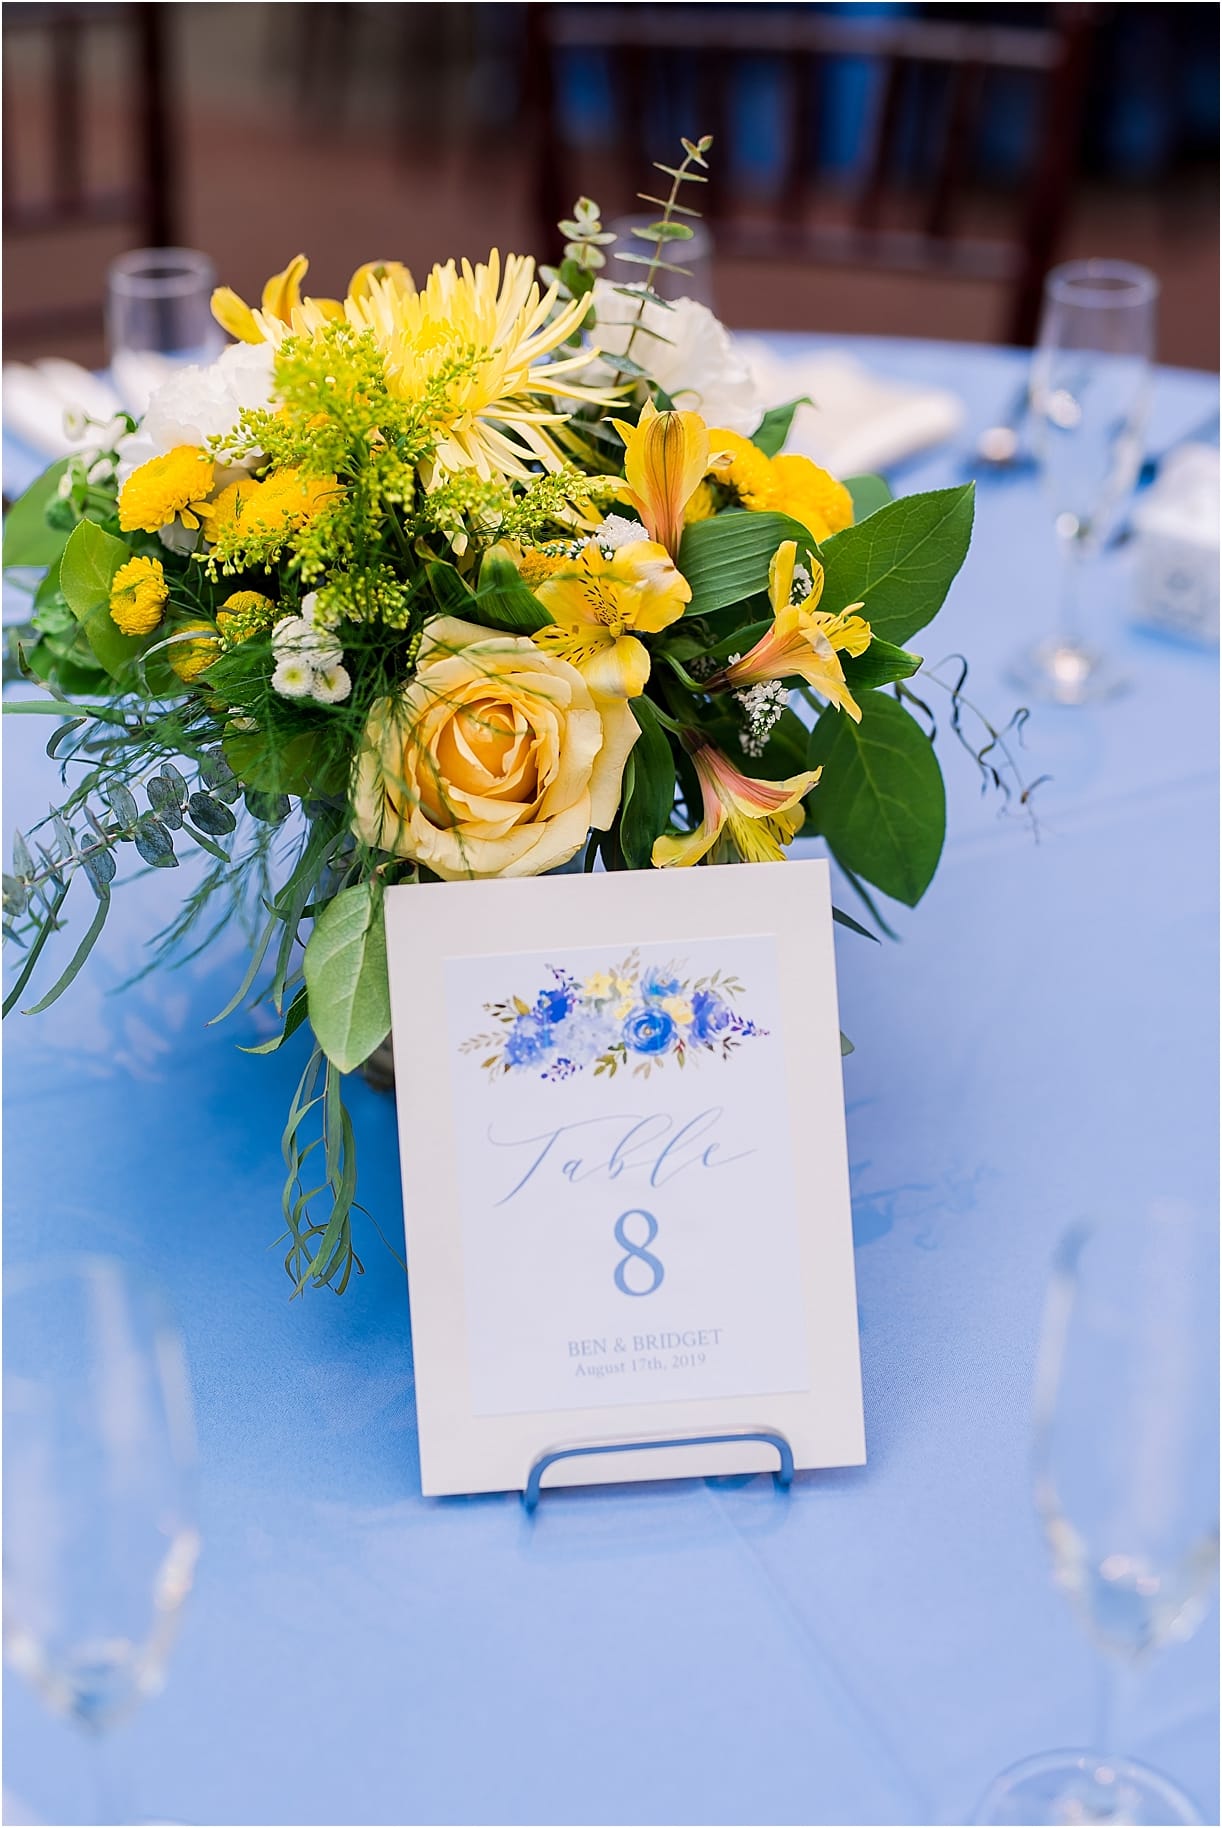 Light Blue and Yellow Wedding | Hill City Bride Wedding Blog Table Number